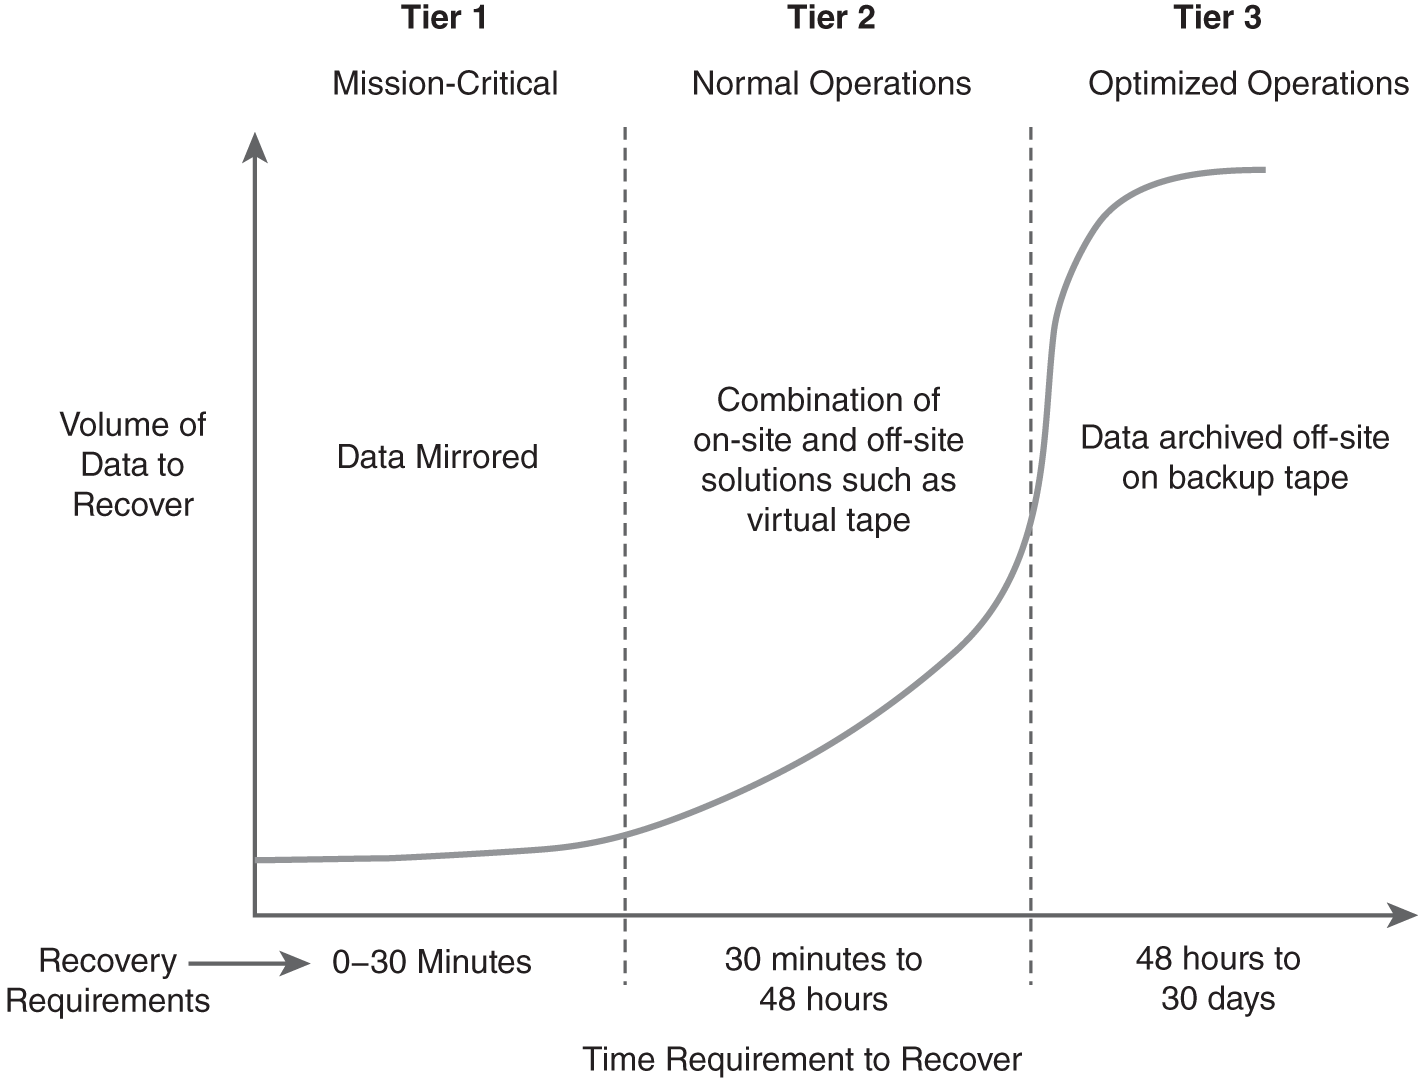 A graph plots data of the volume of data to recover versus the time required to recover it.